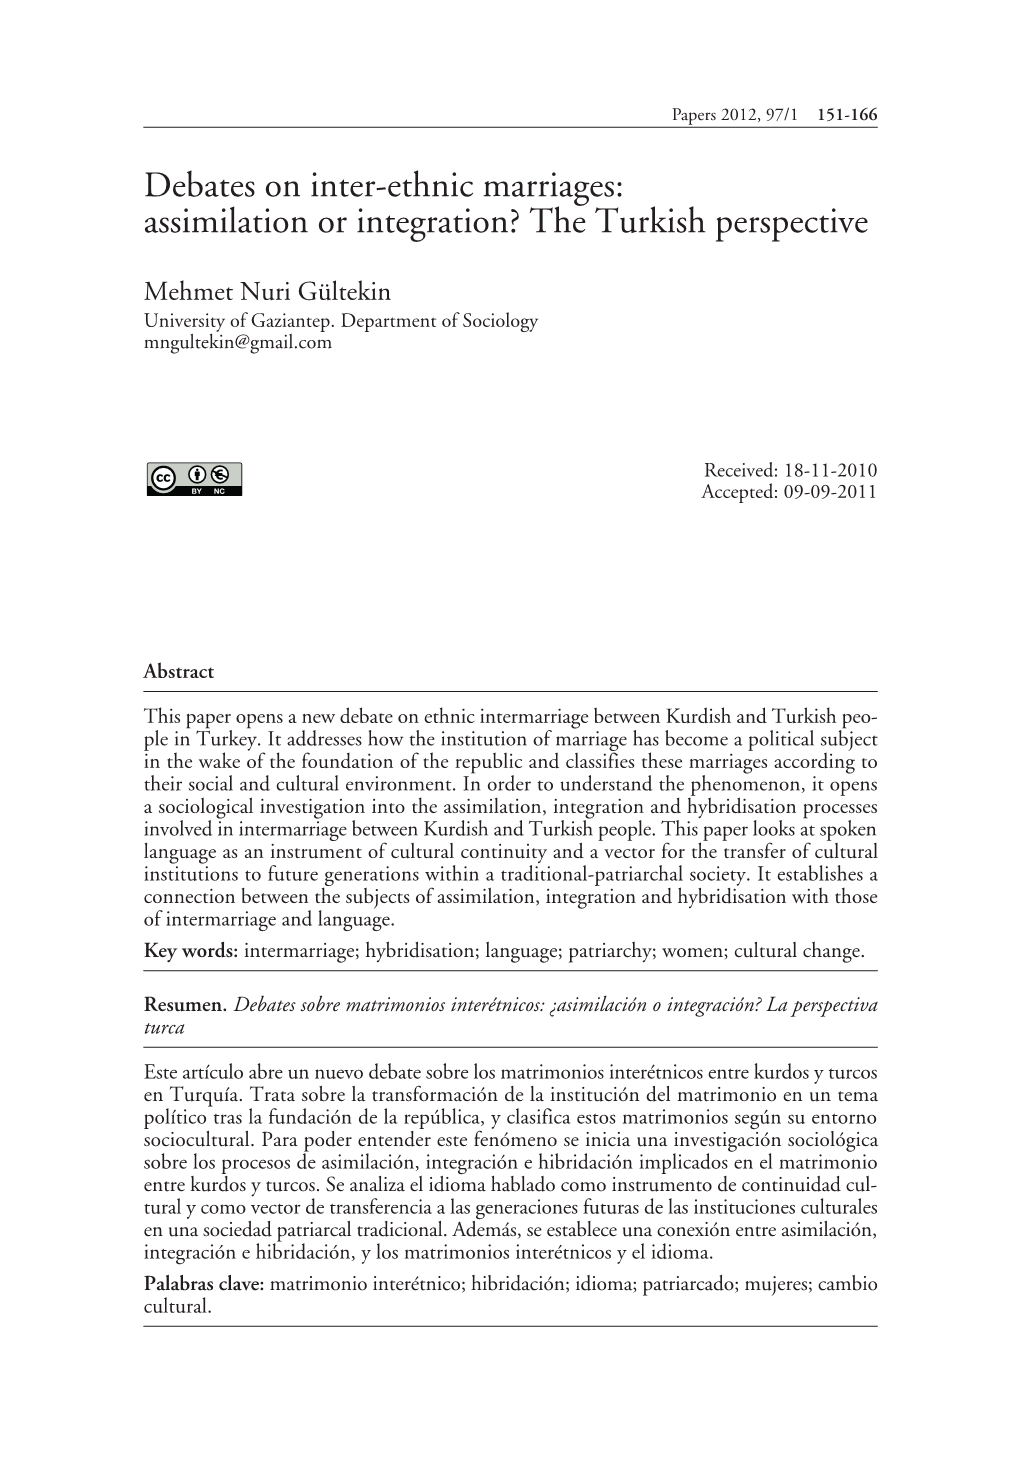 Debates on Inter-Ethnic Marriages: Assimilation Or Integration? the Turkish Perspective